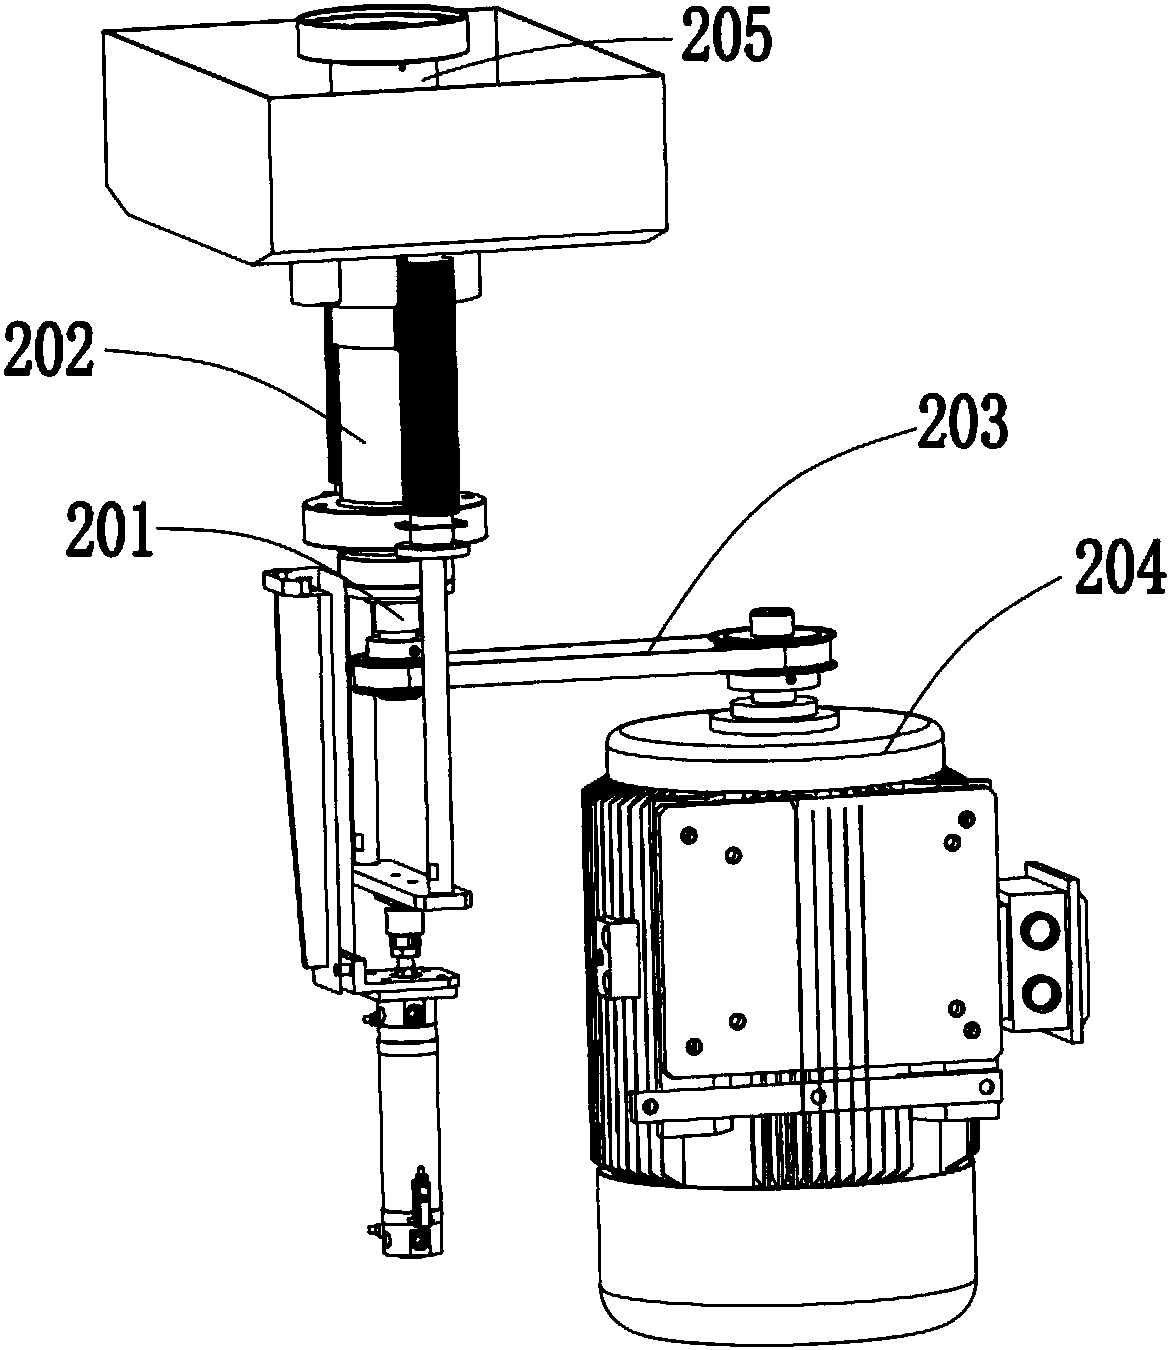 Surface wiping machine for disc-shaped parts